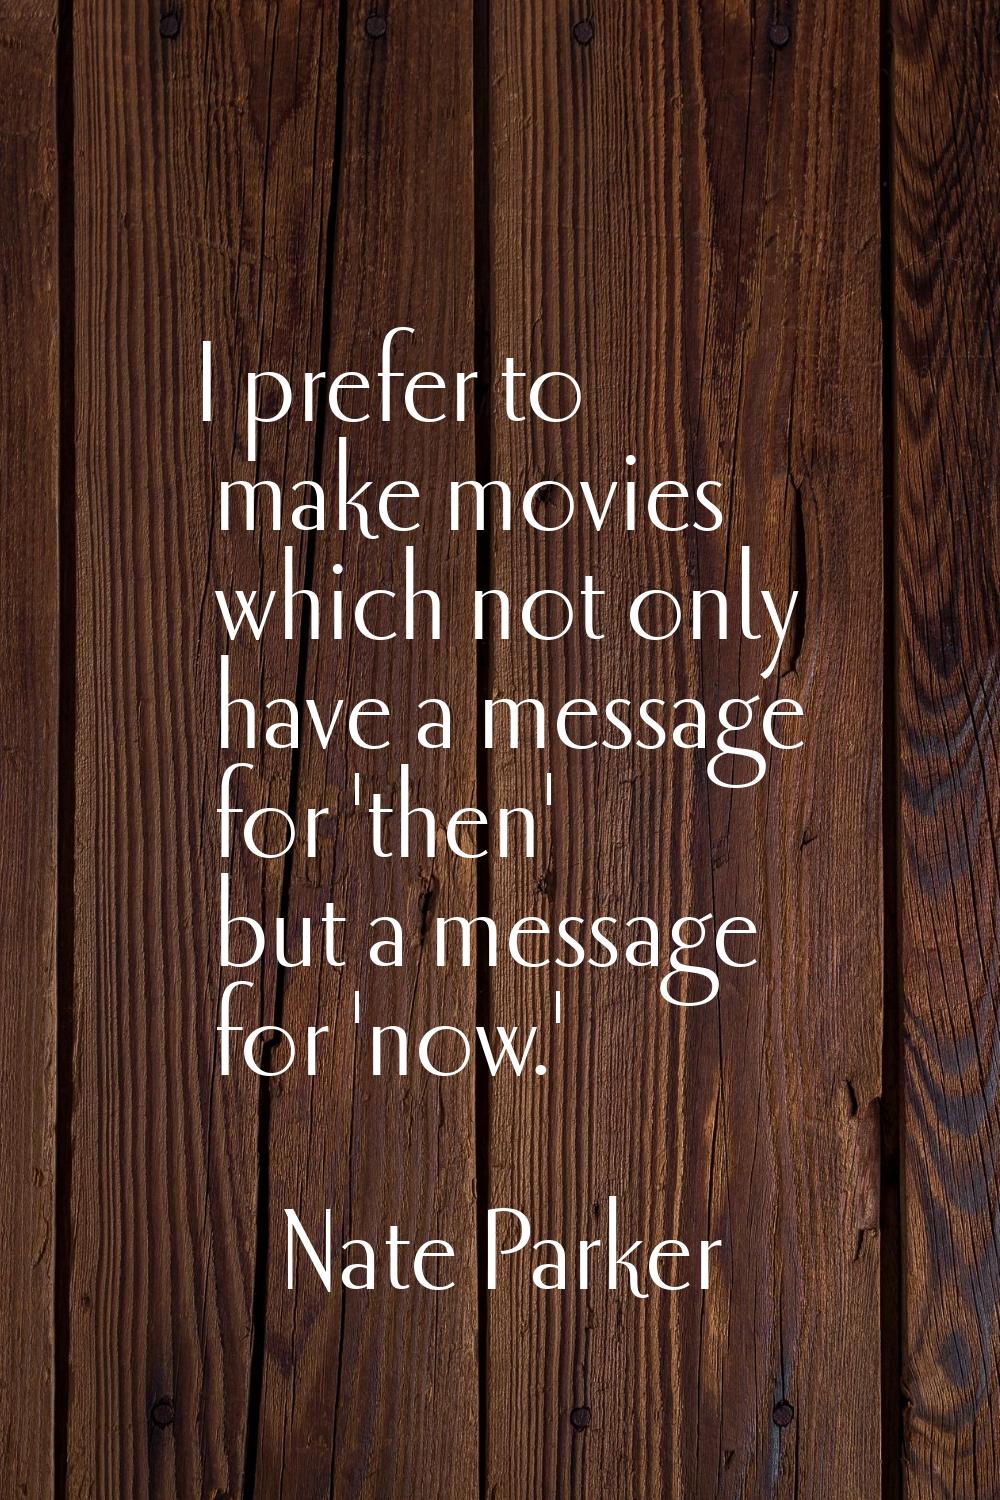 I prefer to make movies which not only have a message for 'then' but a message for 'now.'